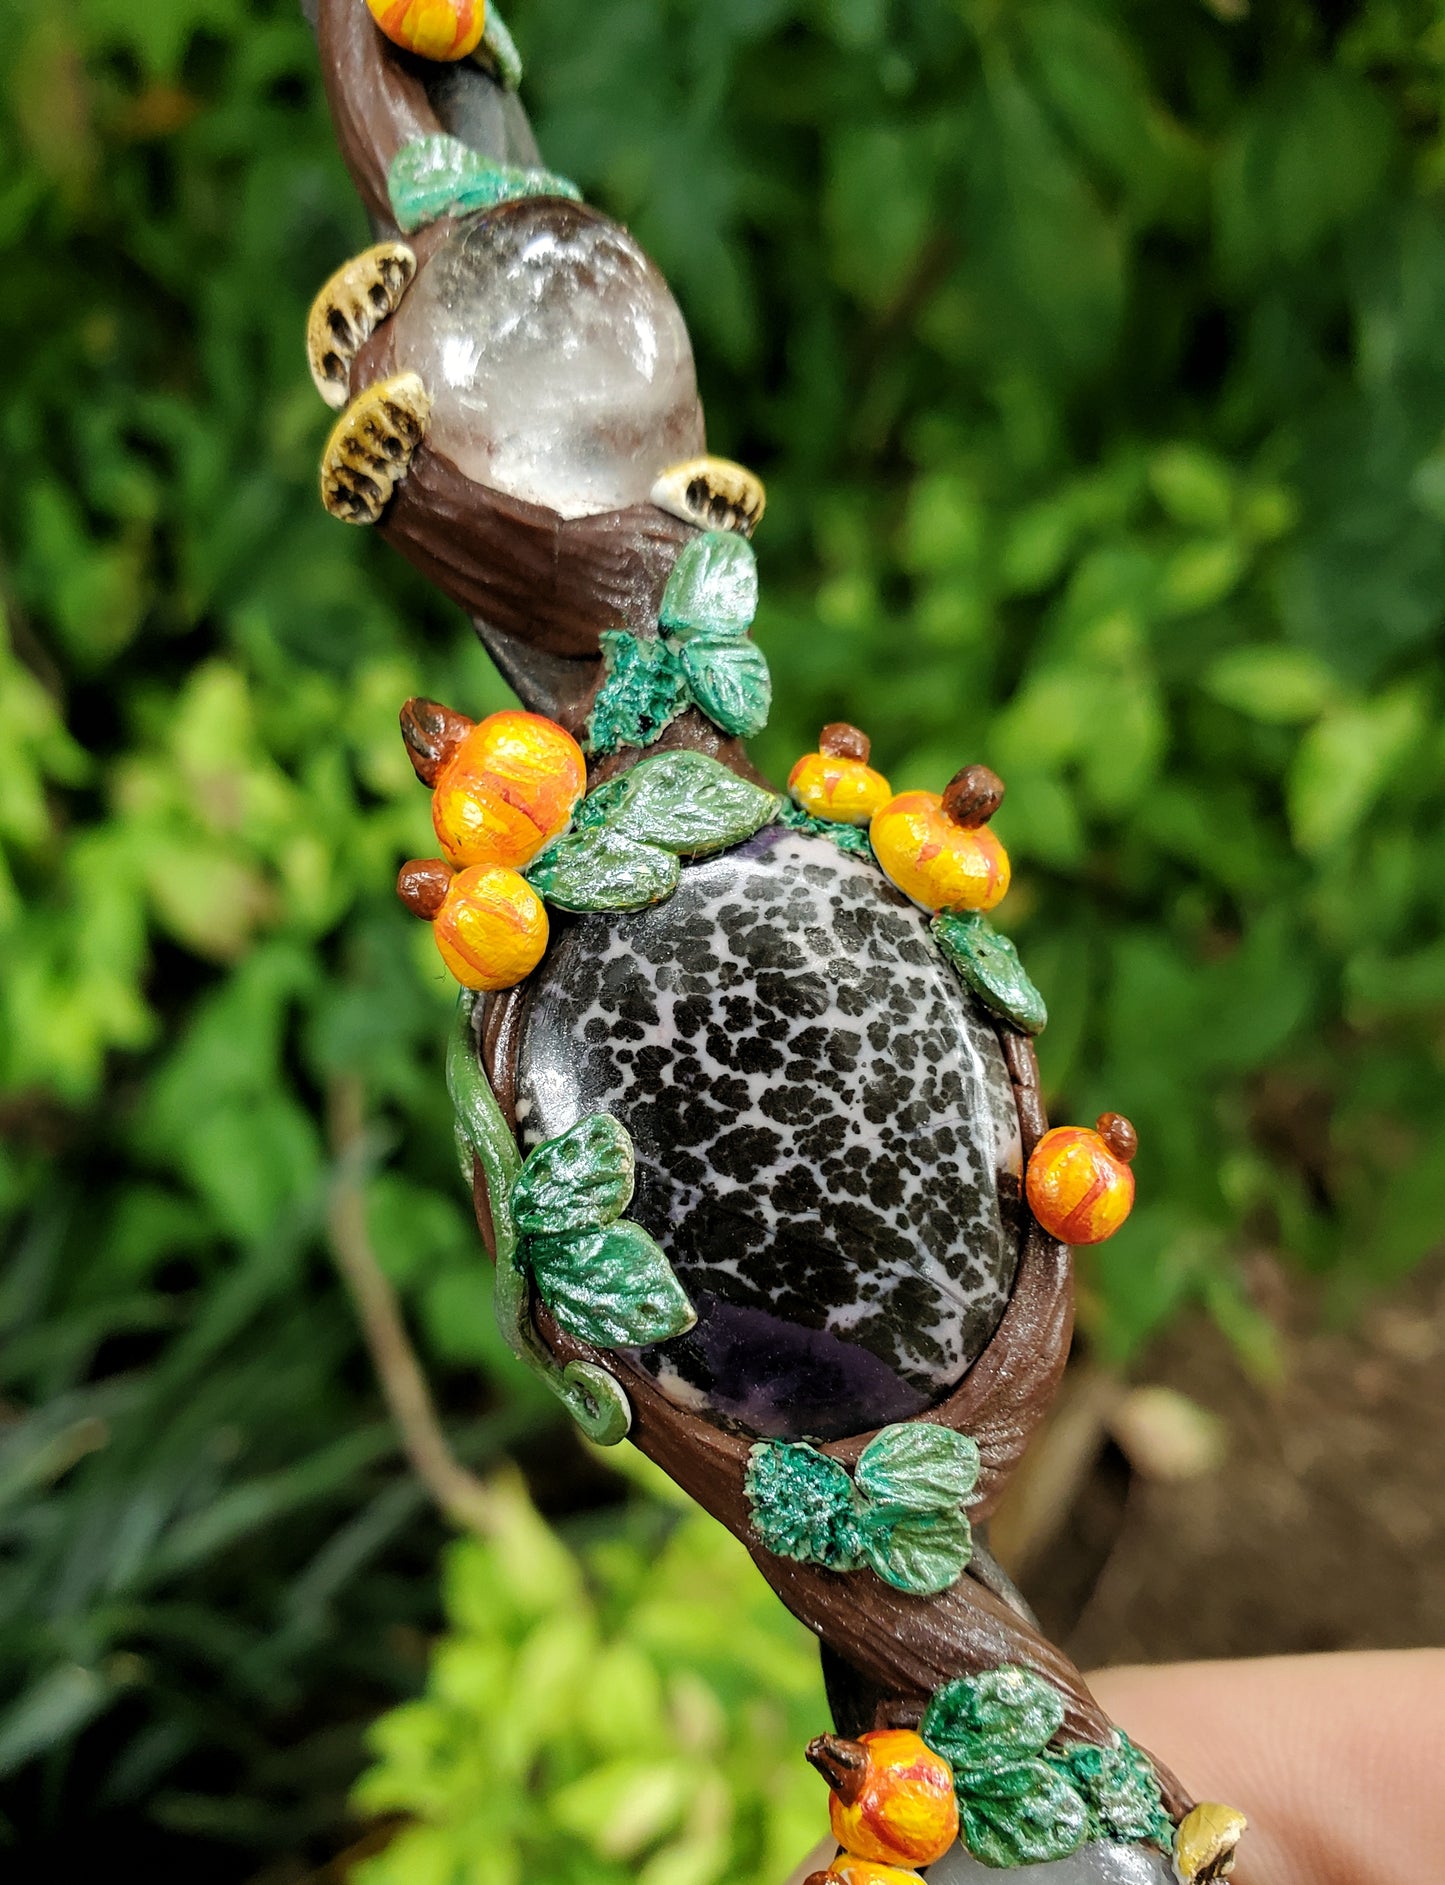 Mystic Earth x Volundr Forge Tiffany Stone Wand with Pumpkins